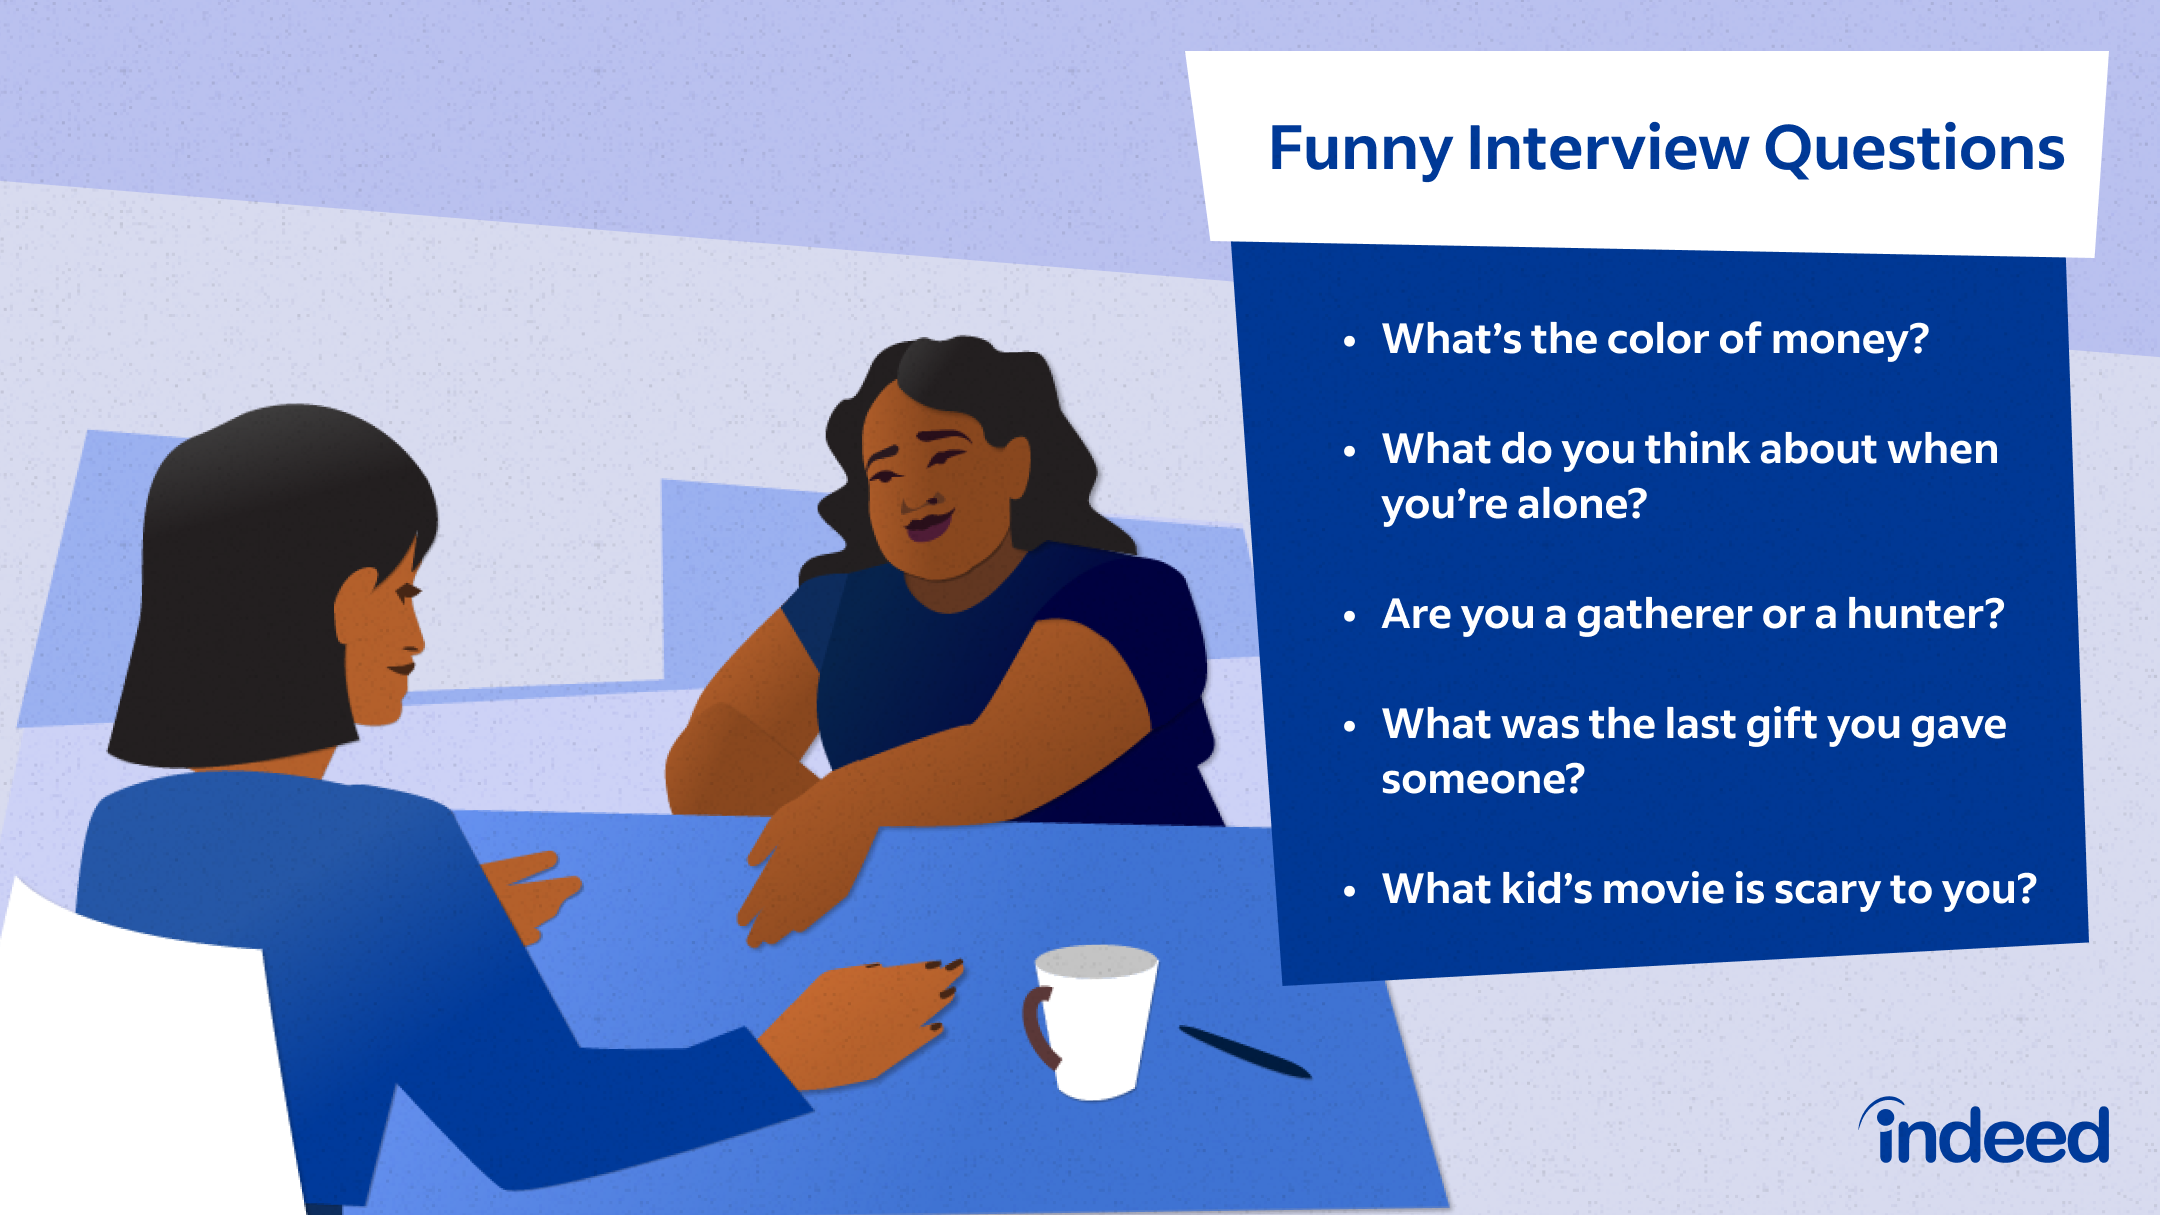 The crazy game of interviewing